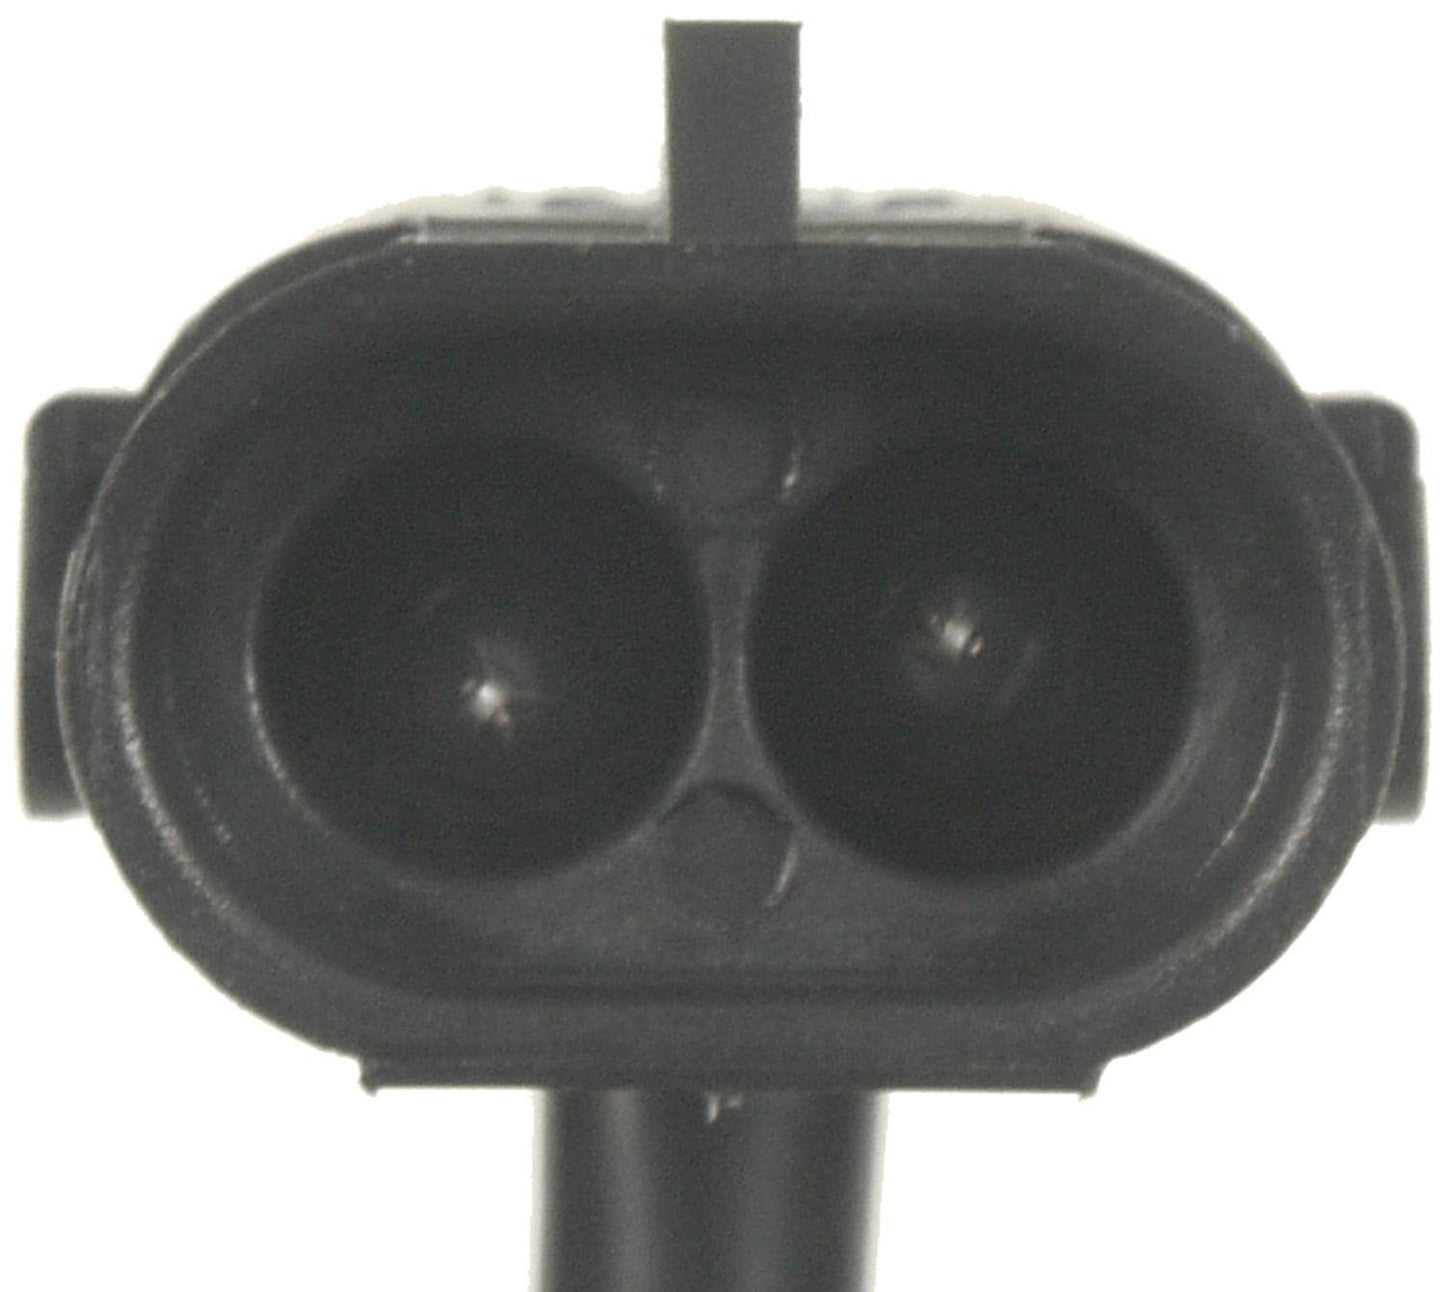 Angle View of 4WD Actuator AC DELCO D3984A